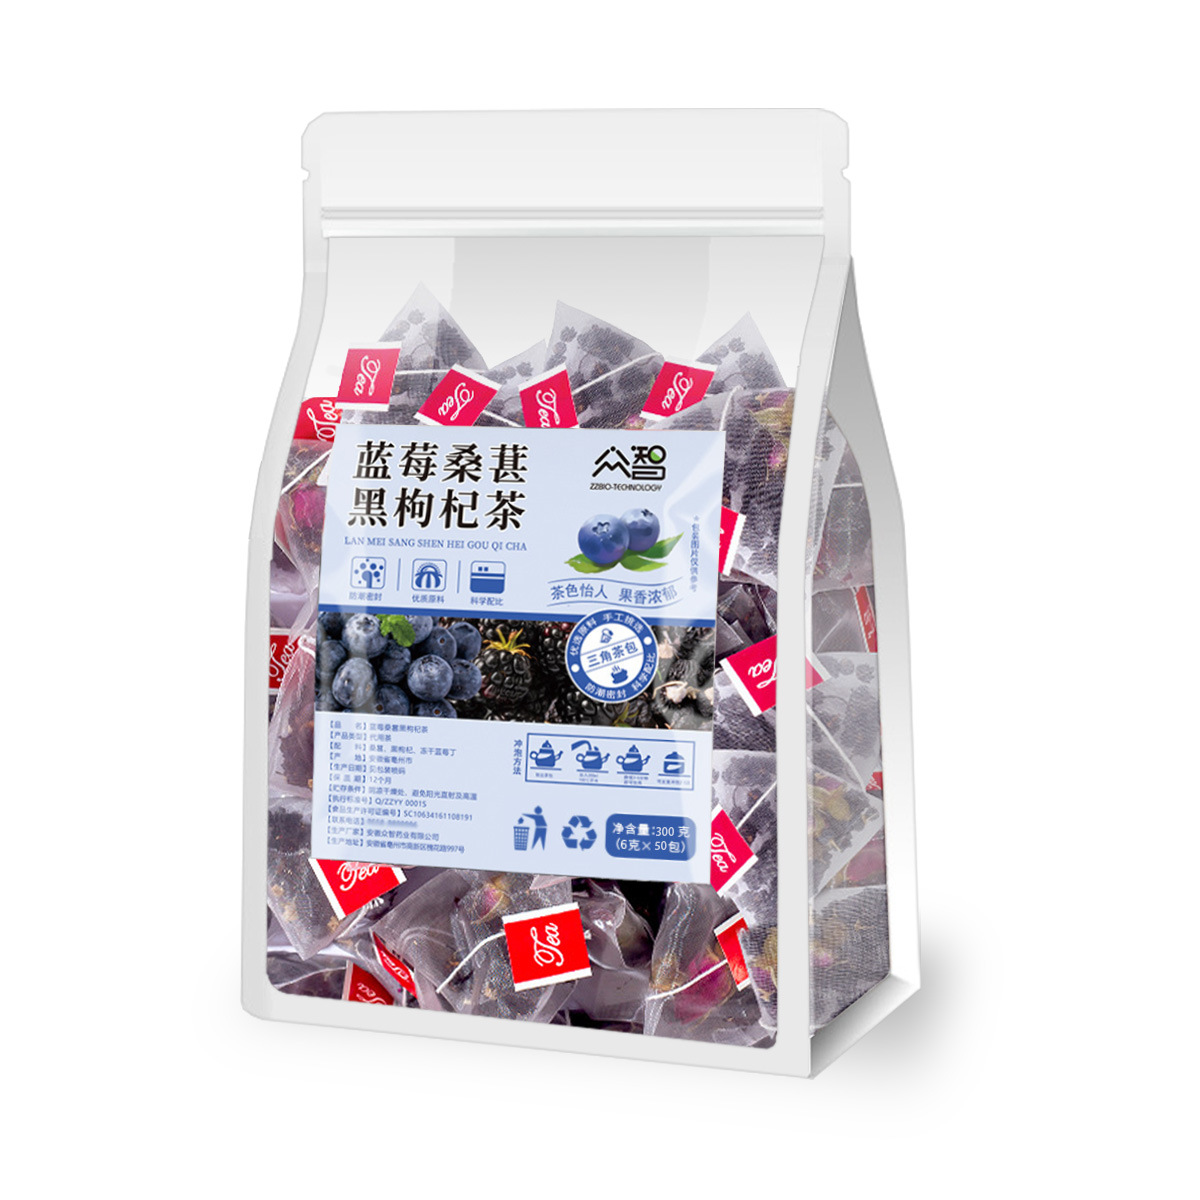 Yujuge blueberry Mulberry Black wolfberry tea herbal tea scented tea triangle bag source factory one-piece delivery distribution